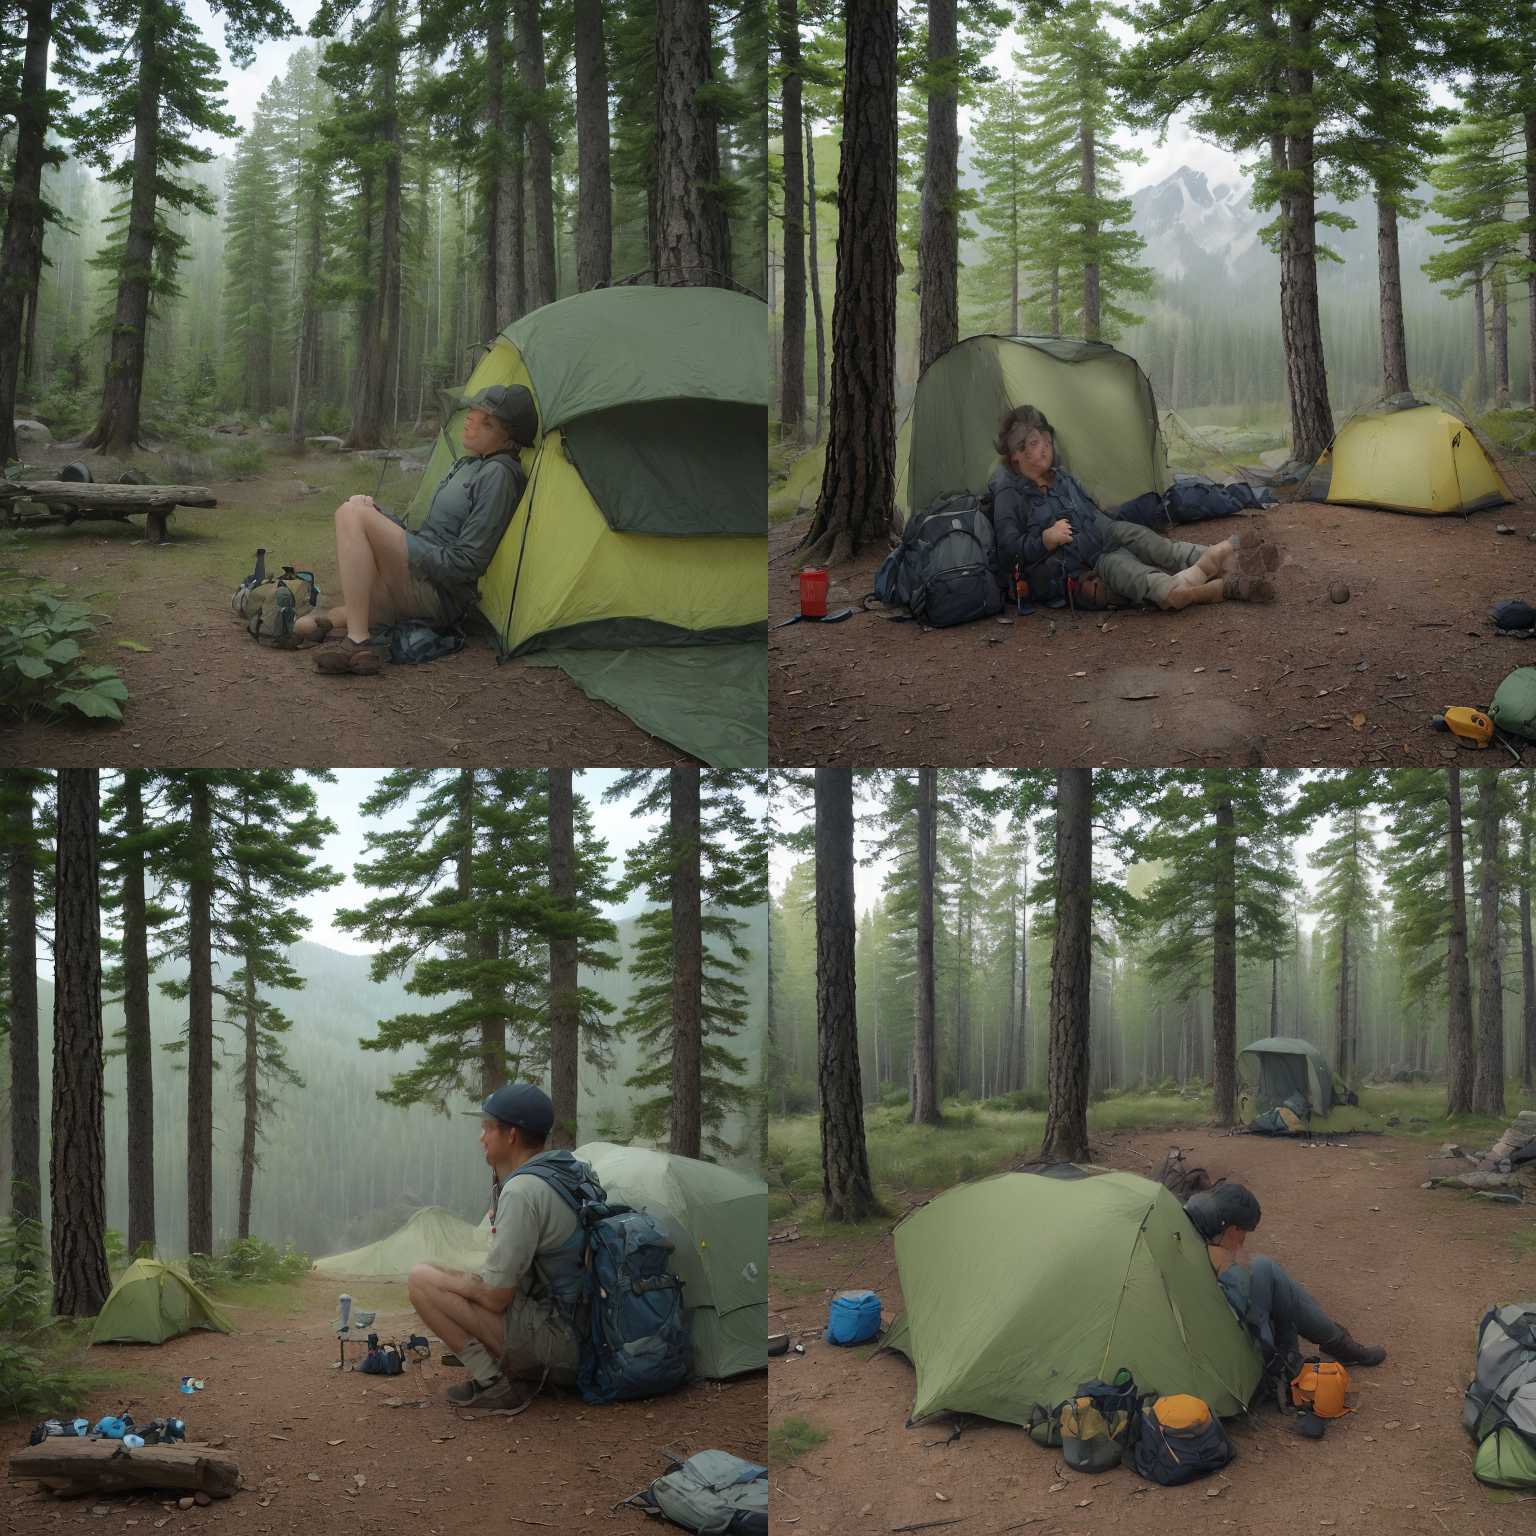 A hiker resting at the campsite